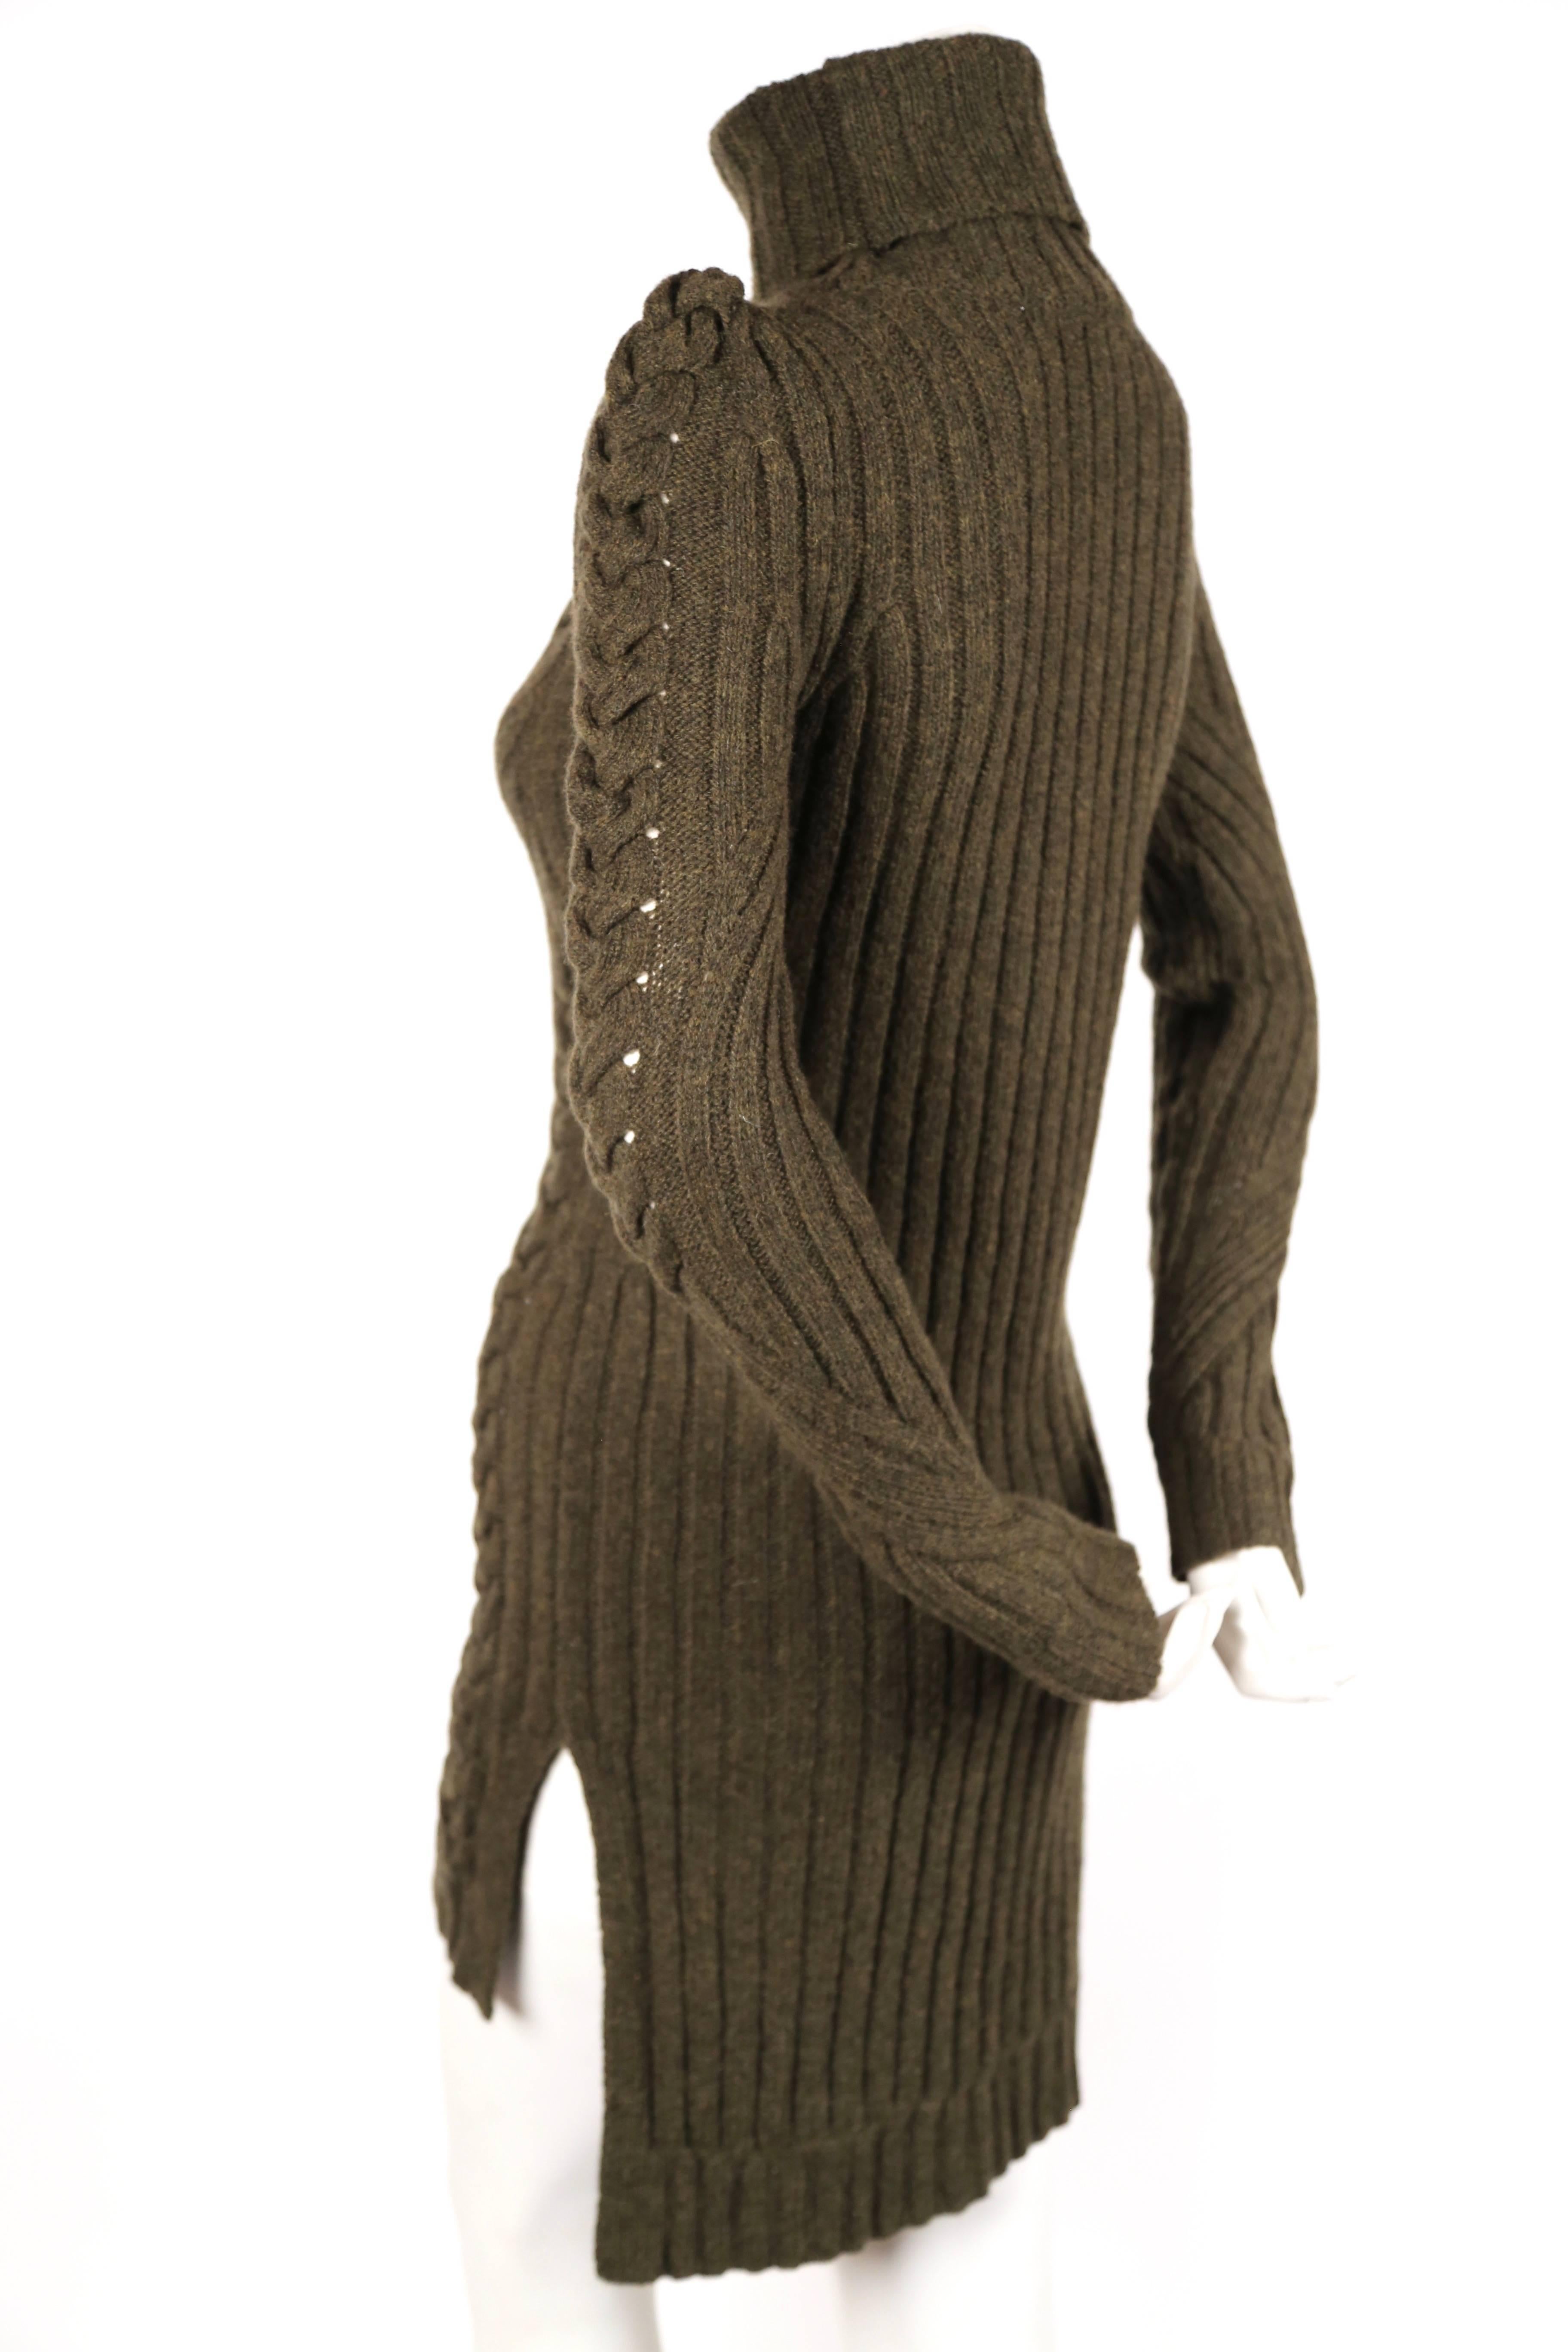 Moss Green cableknit sweater dress designed by Phoebe Philo for Celine for the pre fall 2010 collection. Can be worn as a sweater or dress. Size XS. Approximate measurements:15